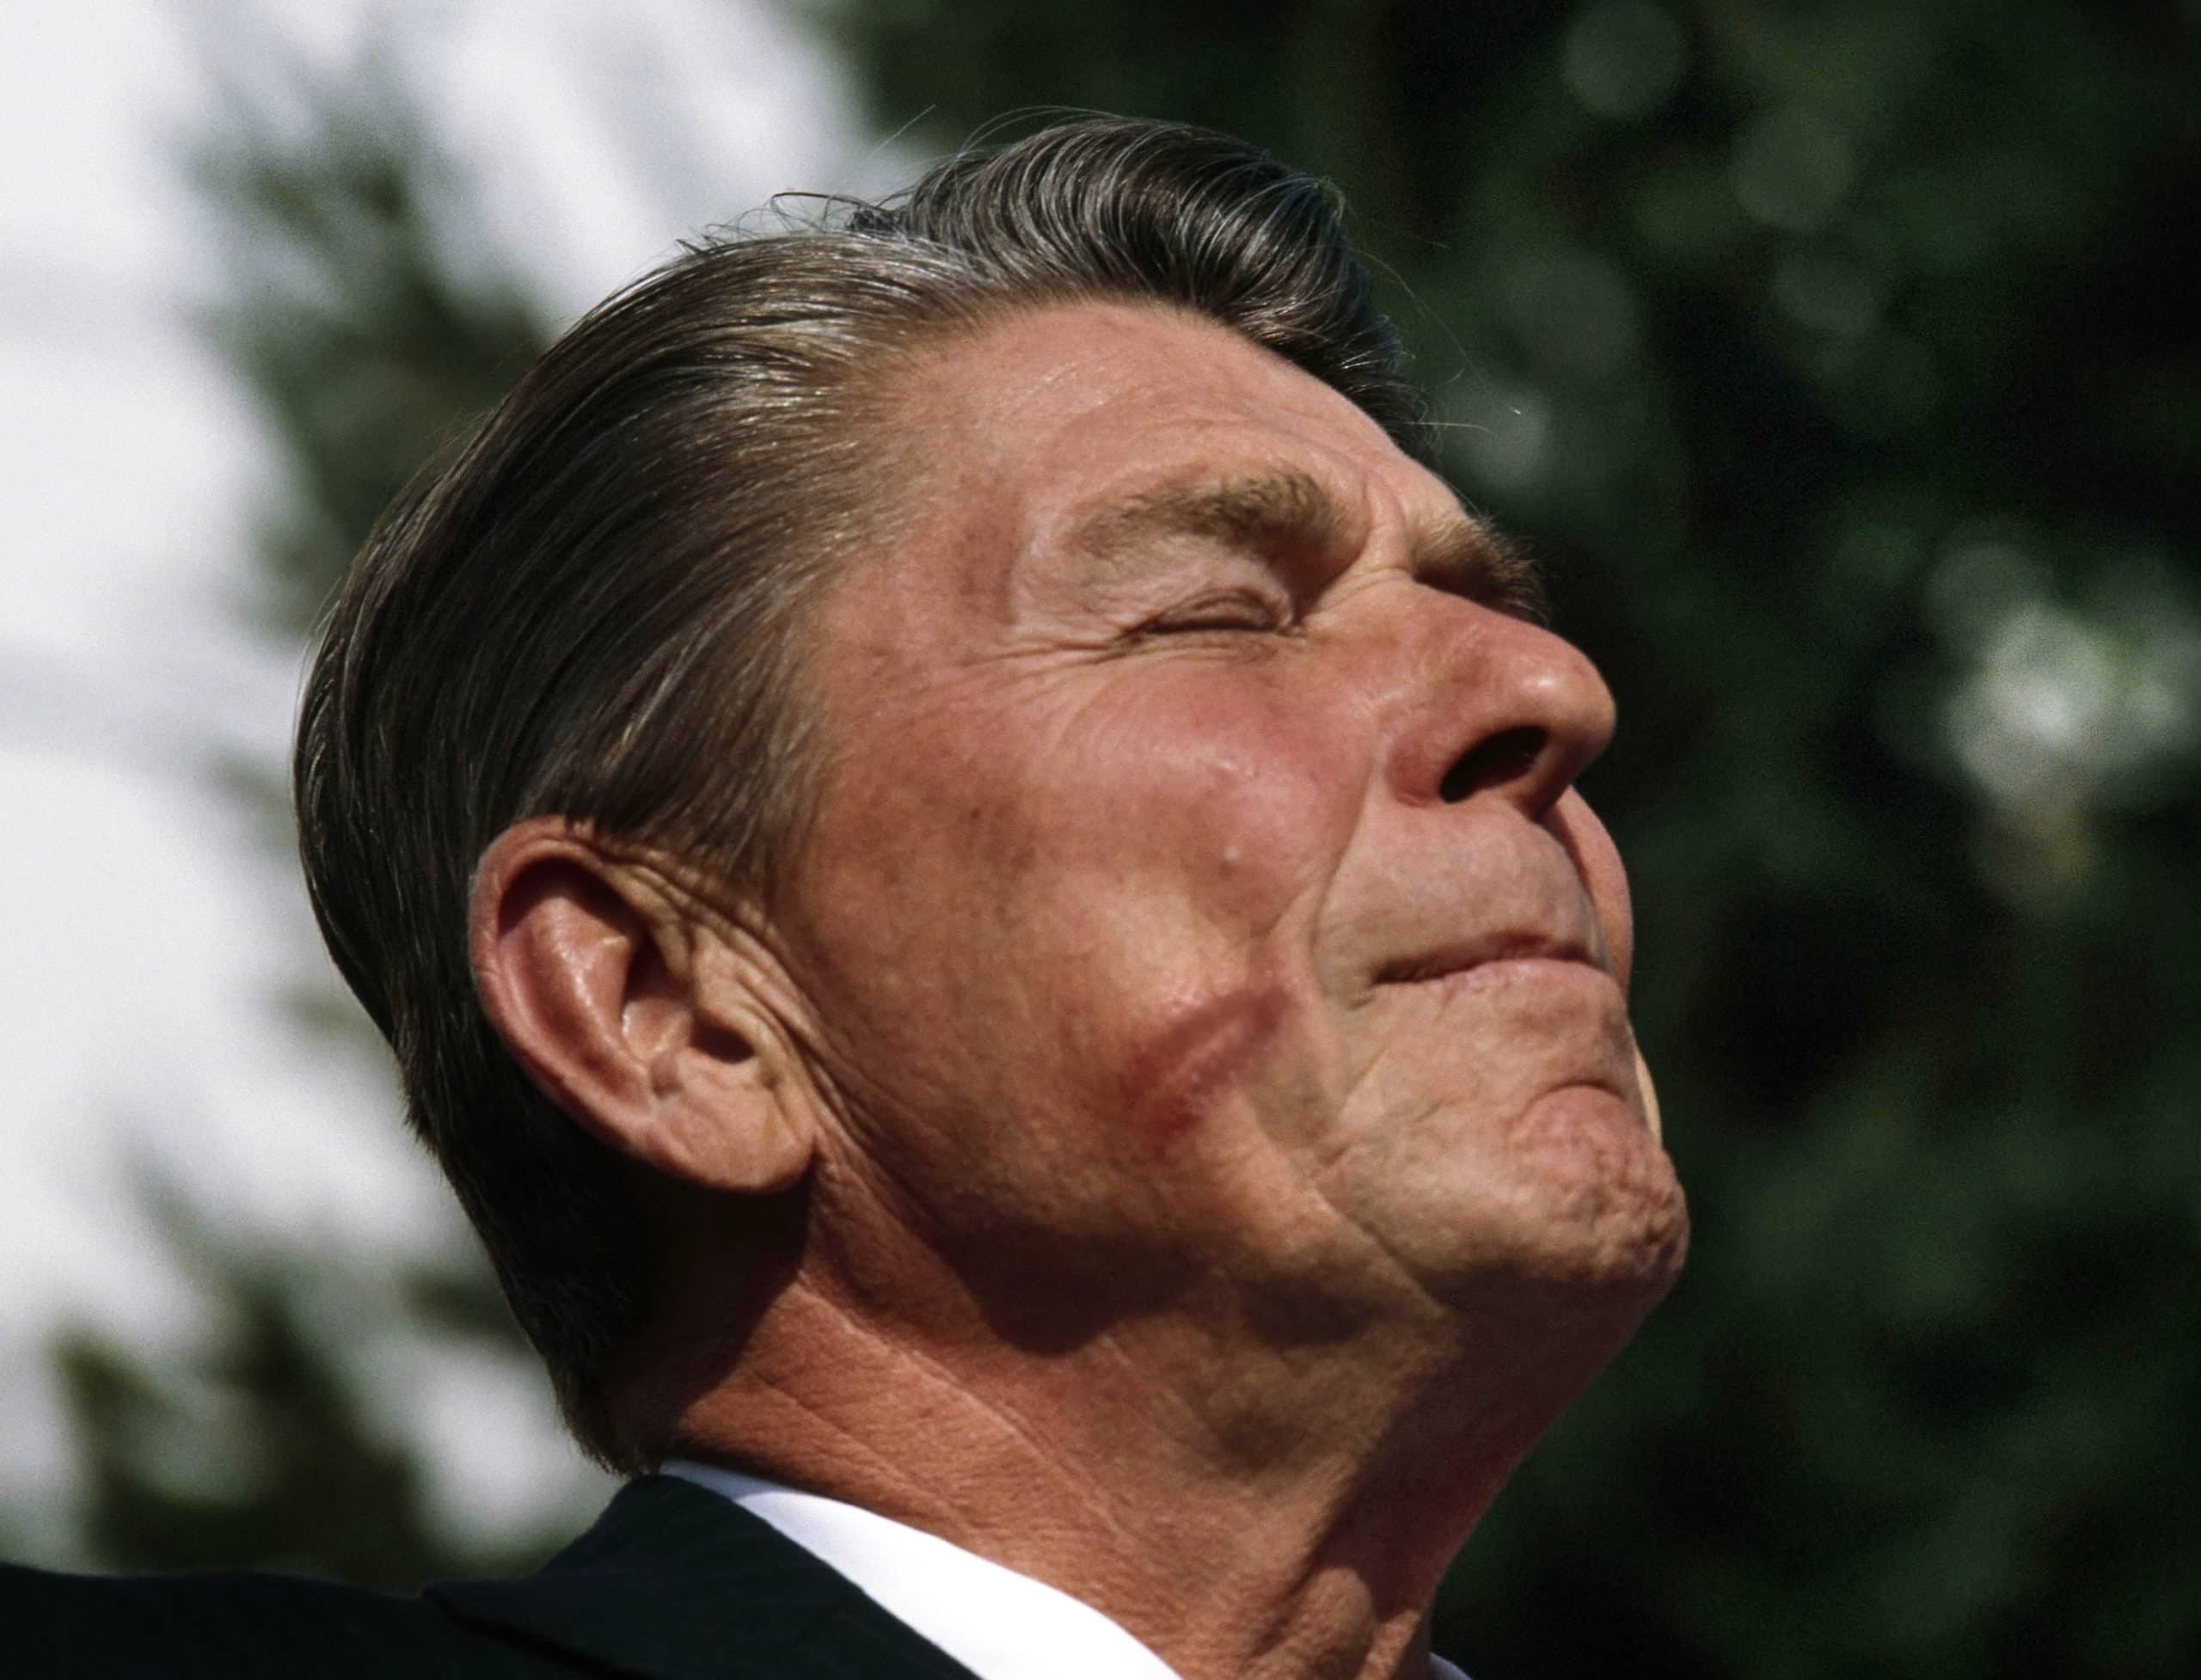 President Ronald Reagan with lipstick on his cheek during a 1984 campaign appearance.